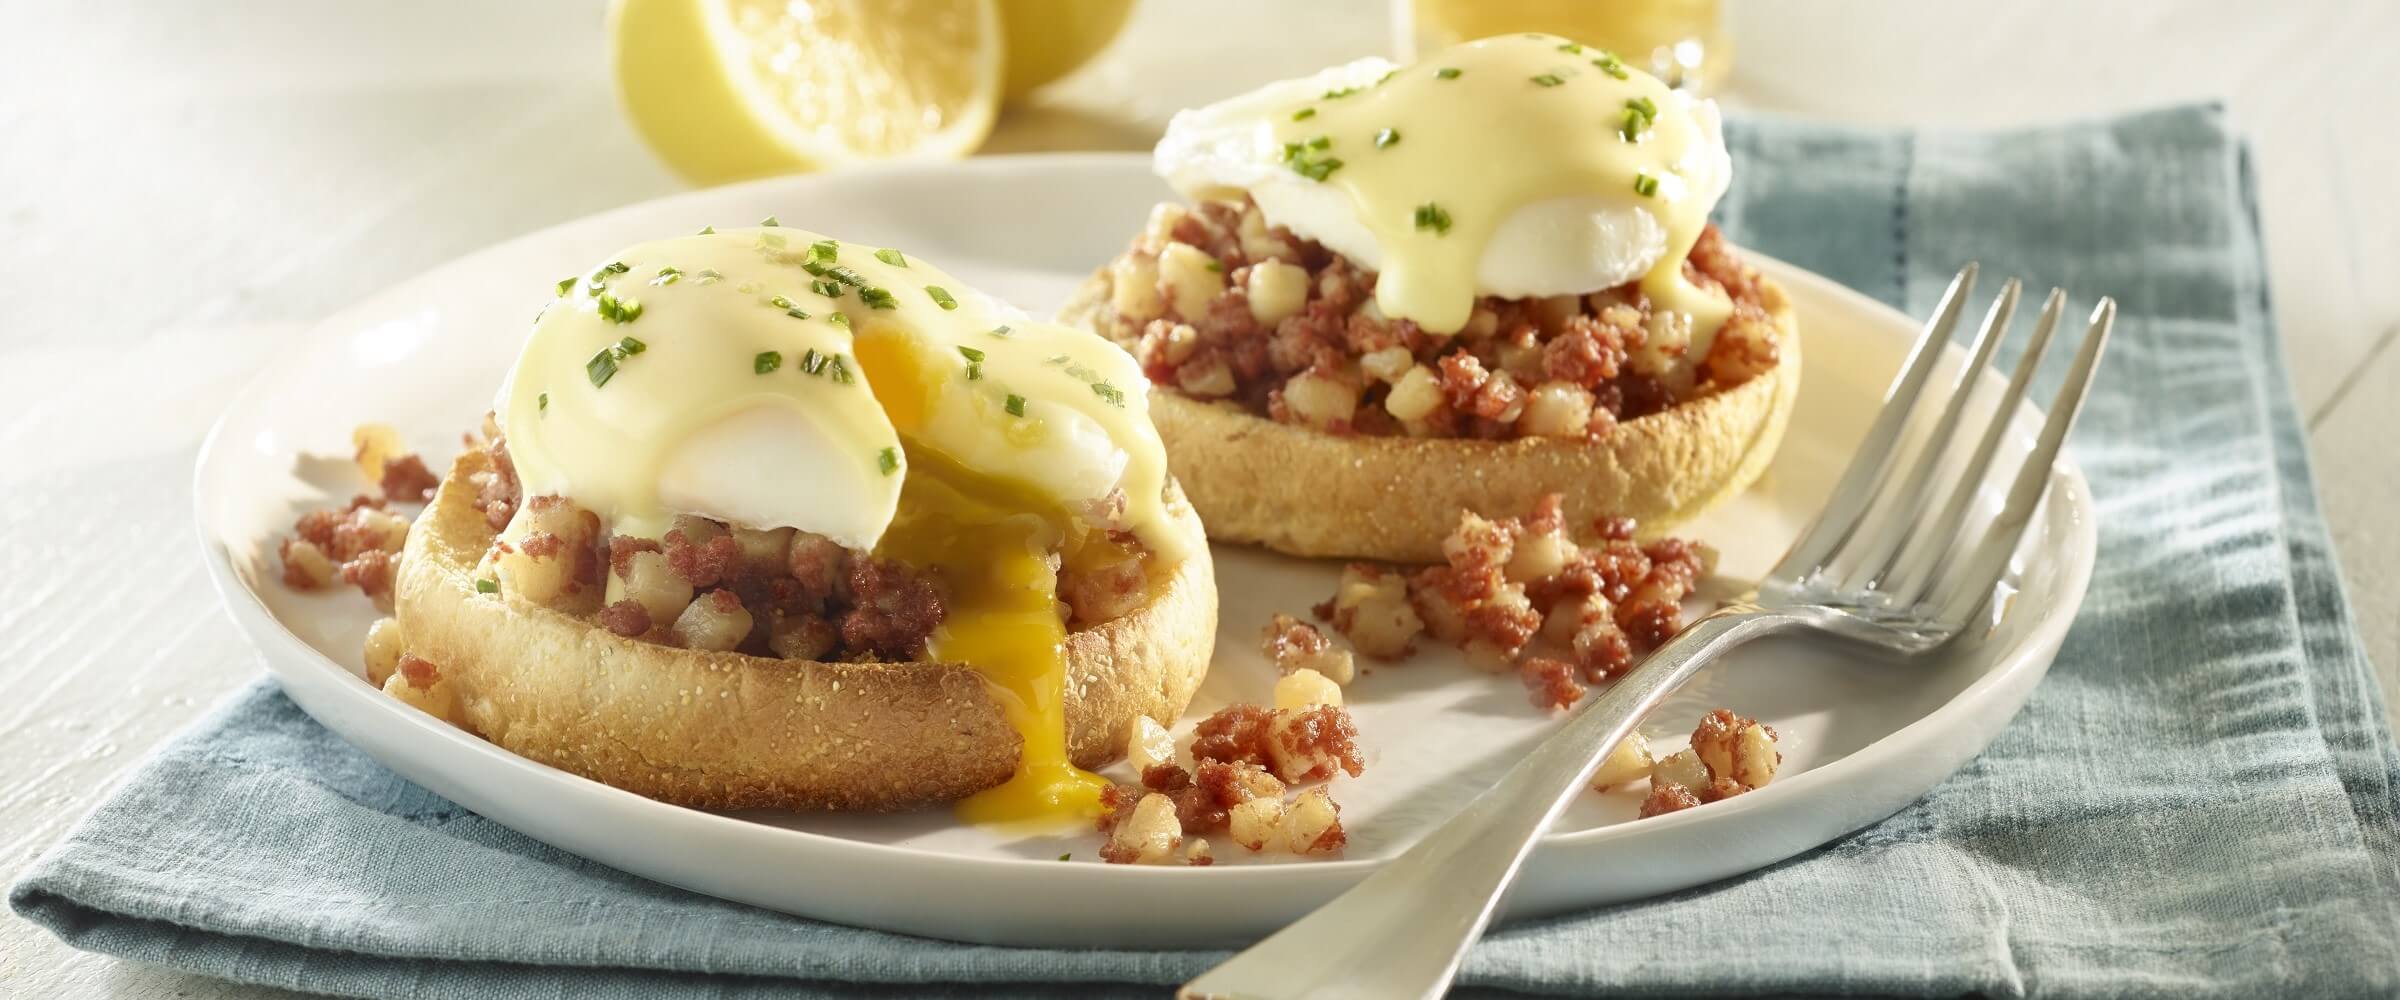 Corned beef hash eggs benedict on white plate with blue linen napkin